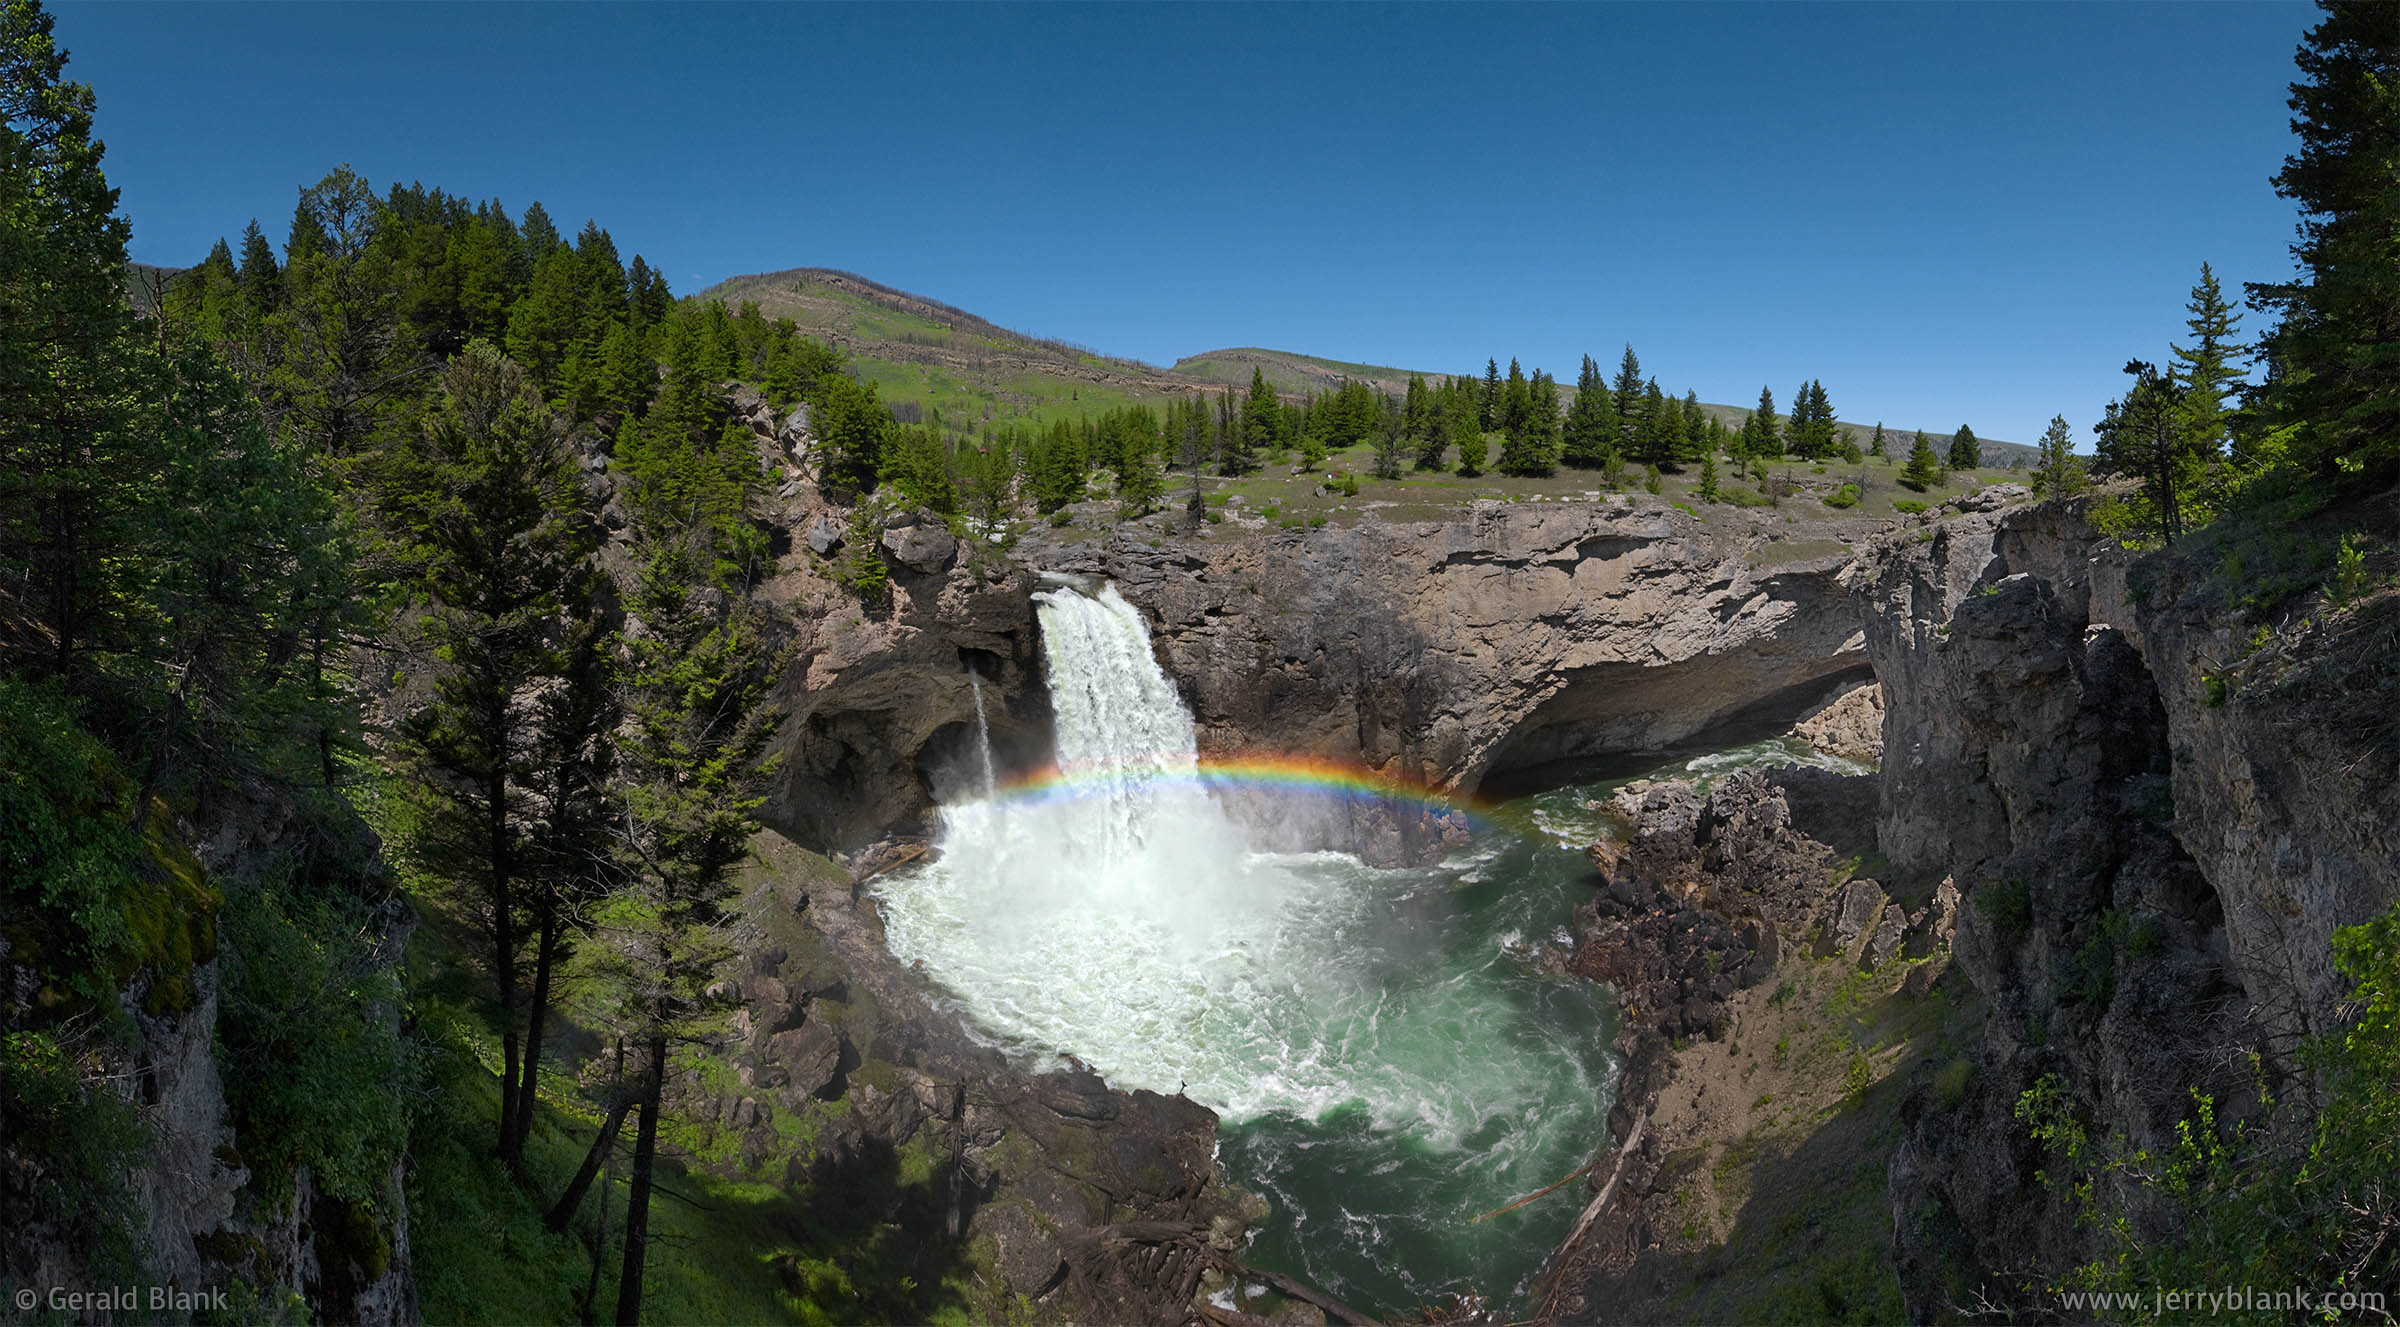 08388 - Rainbow over Natural Bridge Falls on the Boulder River, at Natural Bridge Falls State Park near Big Timber, Montana - photo by Jerry Blank